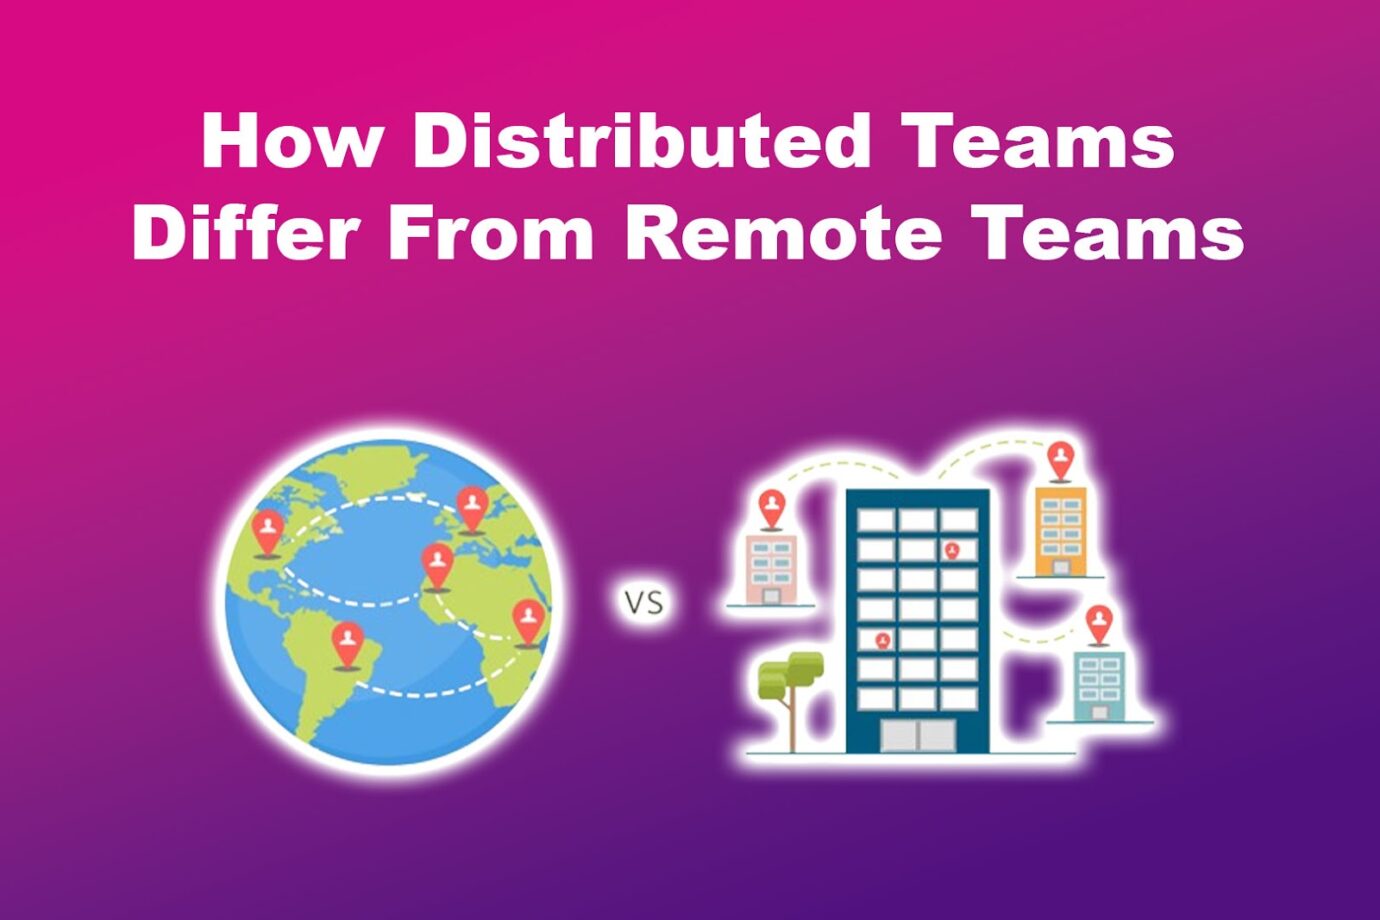 How Distributed Teams Differ From Remote Teams